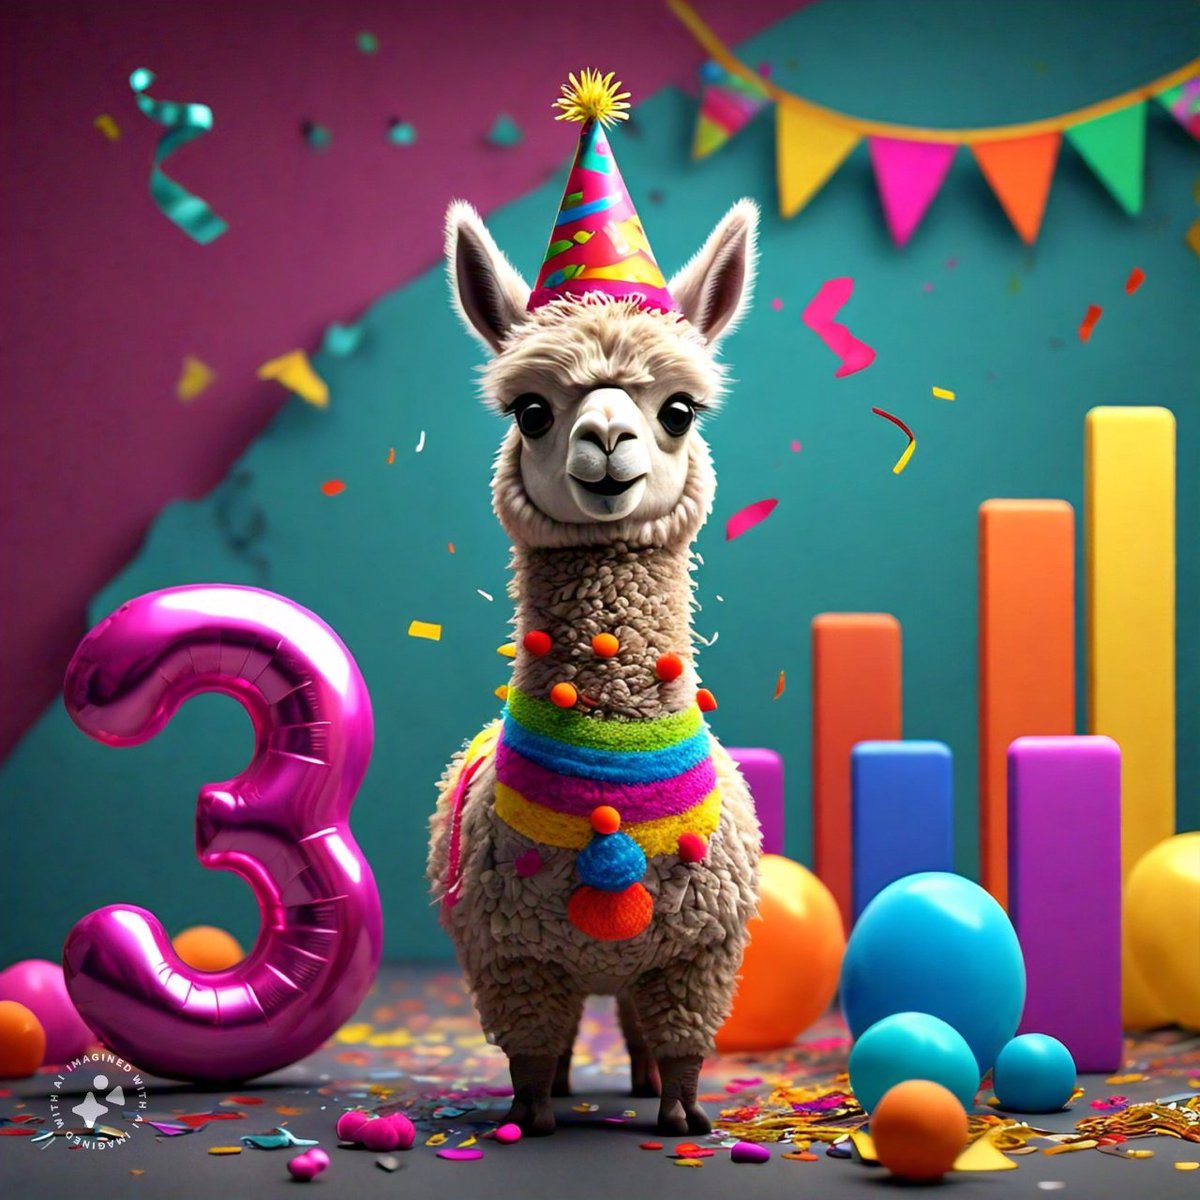 What a week since we released Llama 3! I couldn’t be more proud of the response. 🏆 Llama 3 70B is now the highest ranking open model on @lmsysorg leaderboard. 📈 1.2M+ downloads. 🤗 600+ derivative models on @HuggingFace. I'm excited for much more to come.